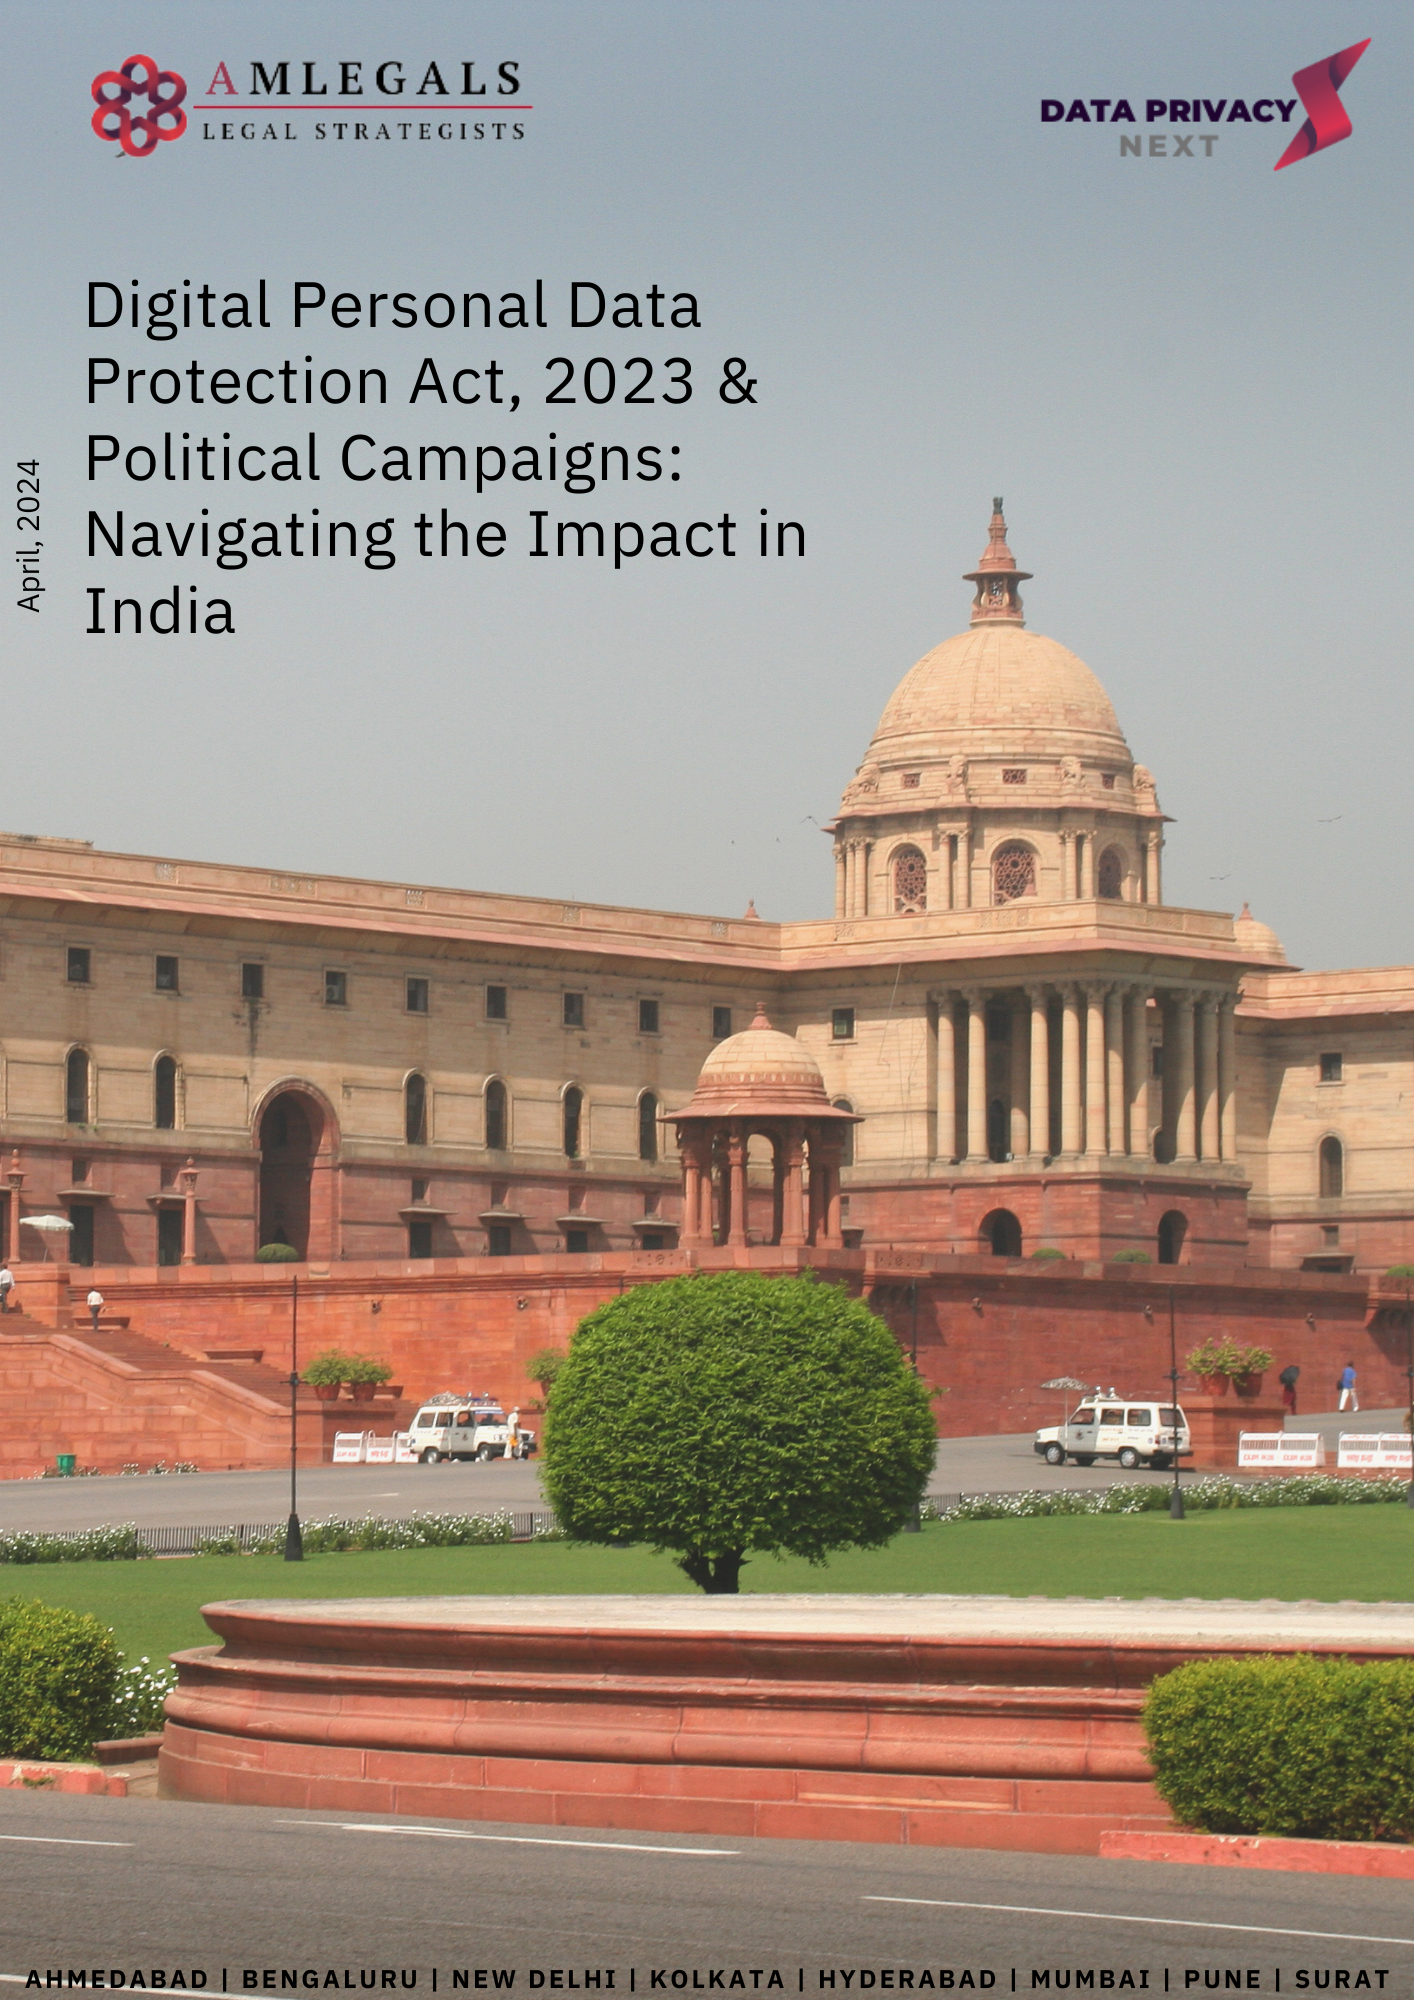 Digital Personal Data Protection Act, 2023 & Political Campaigns: Navigating the Impact in India